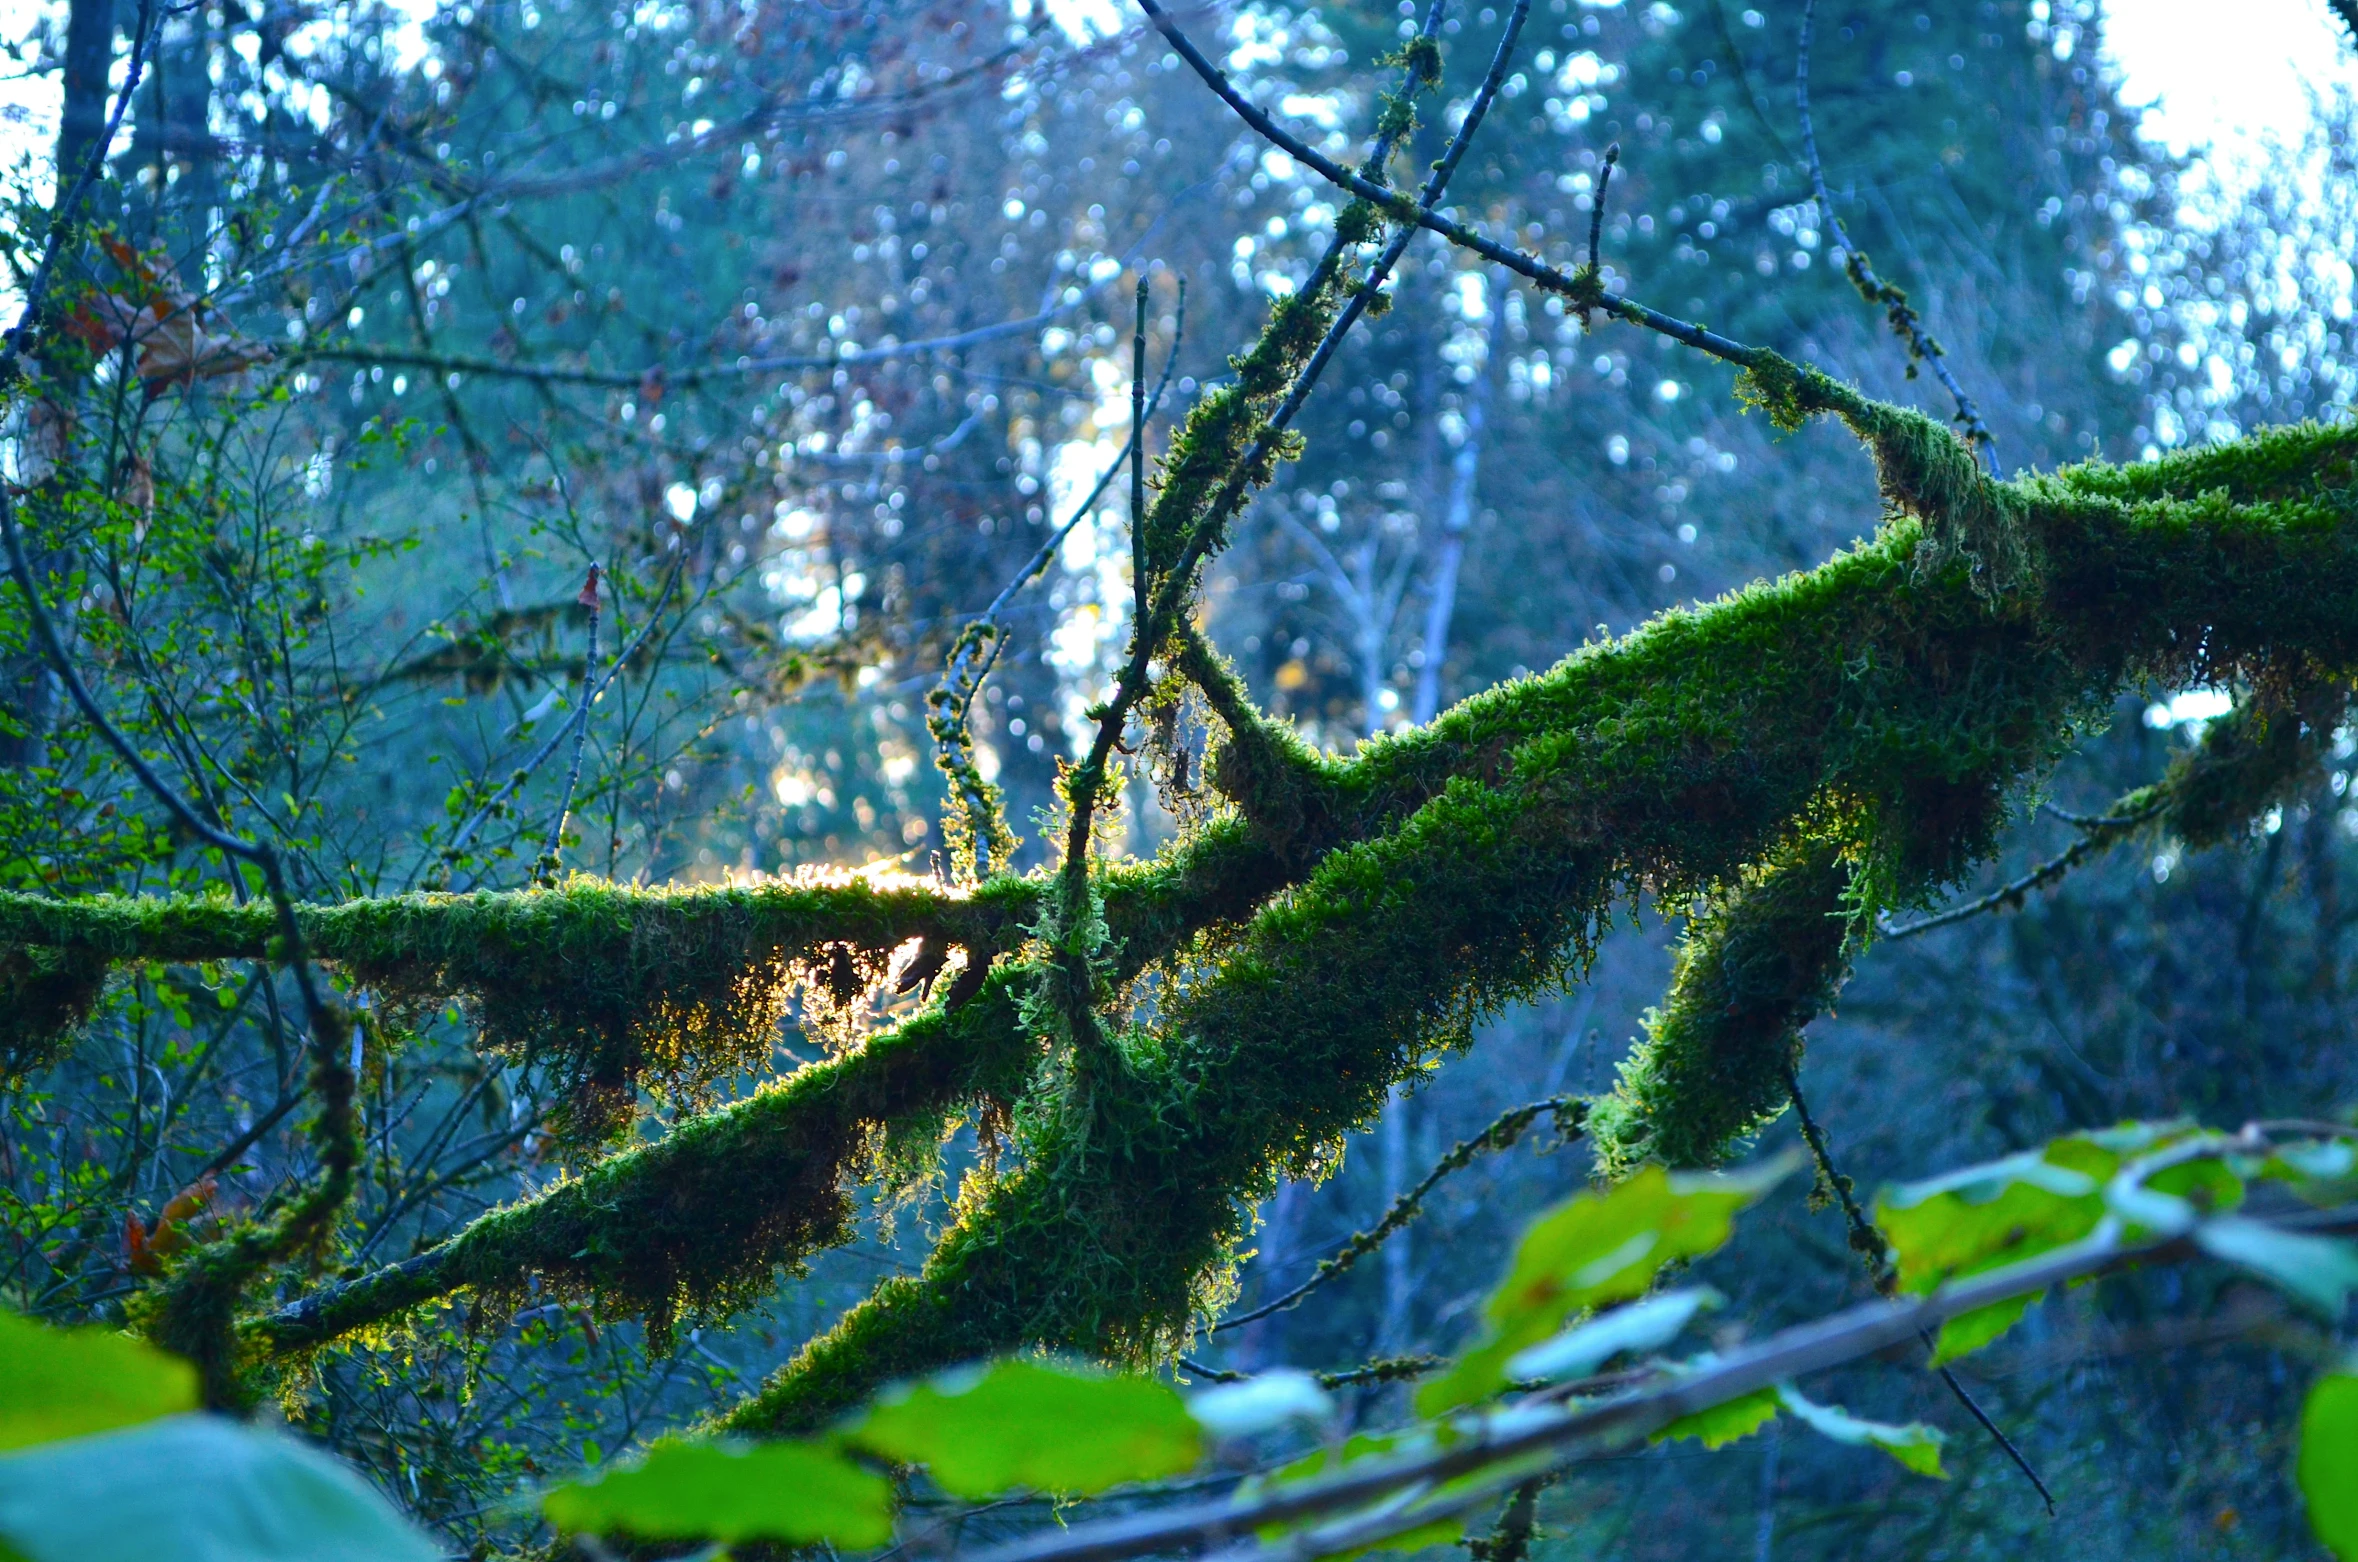 a mossy nch hanging from the side of a tree